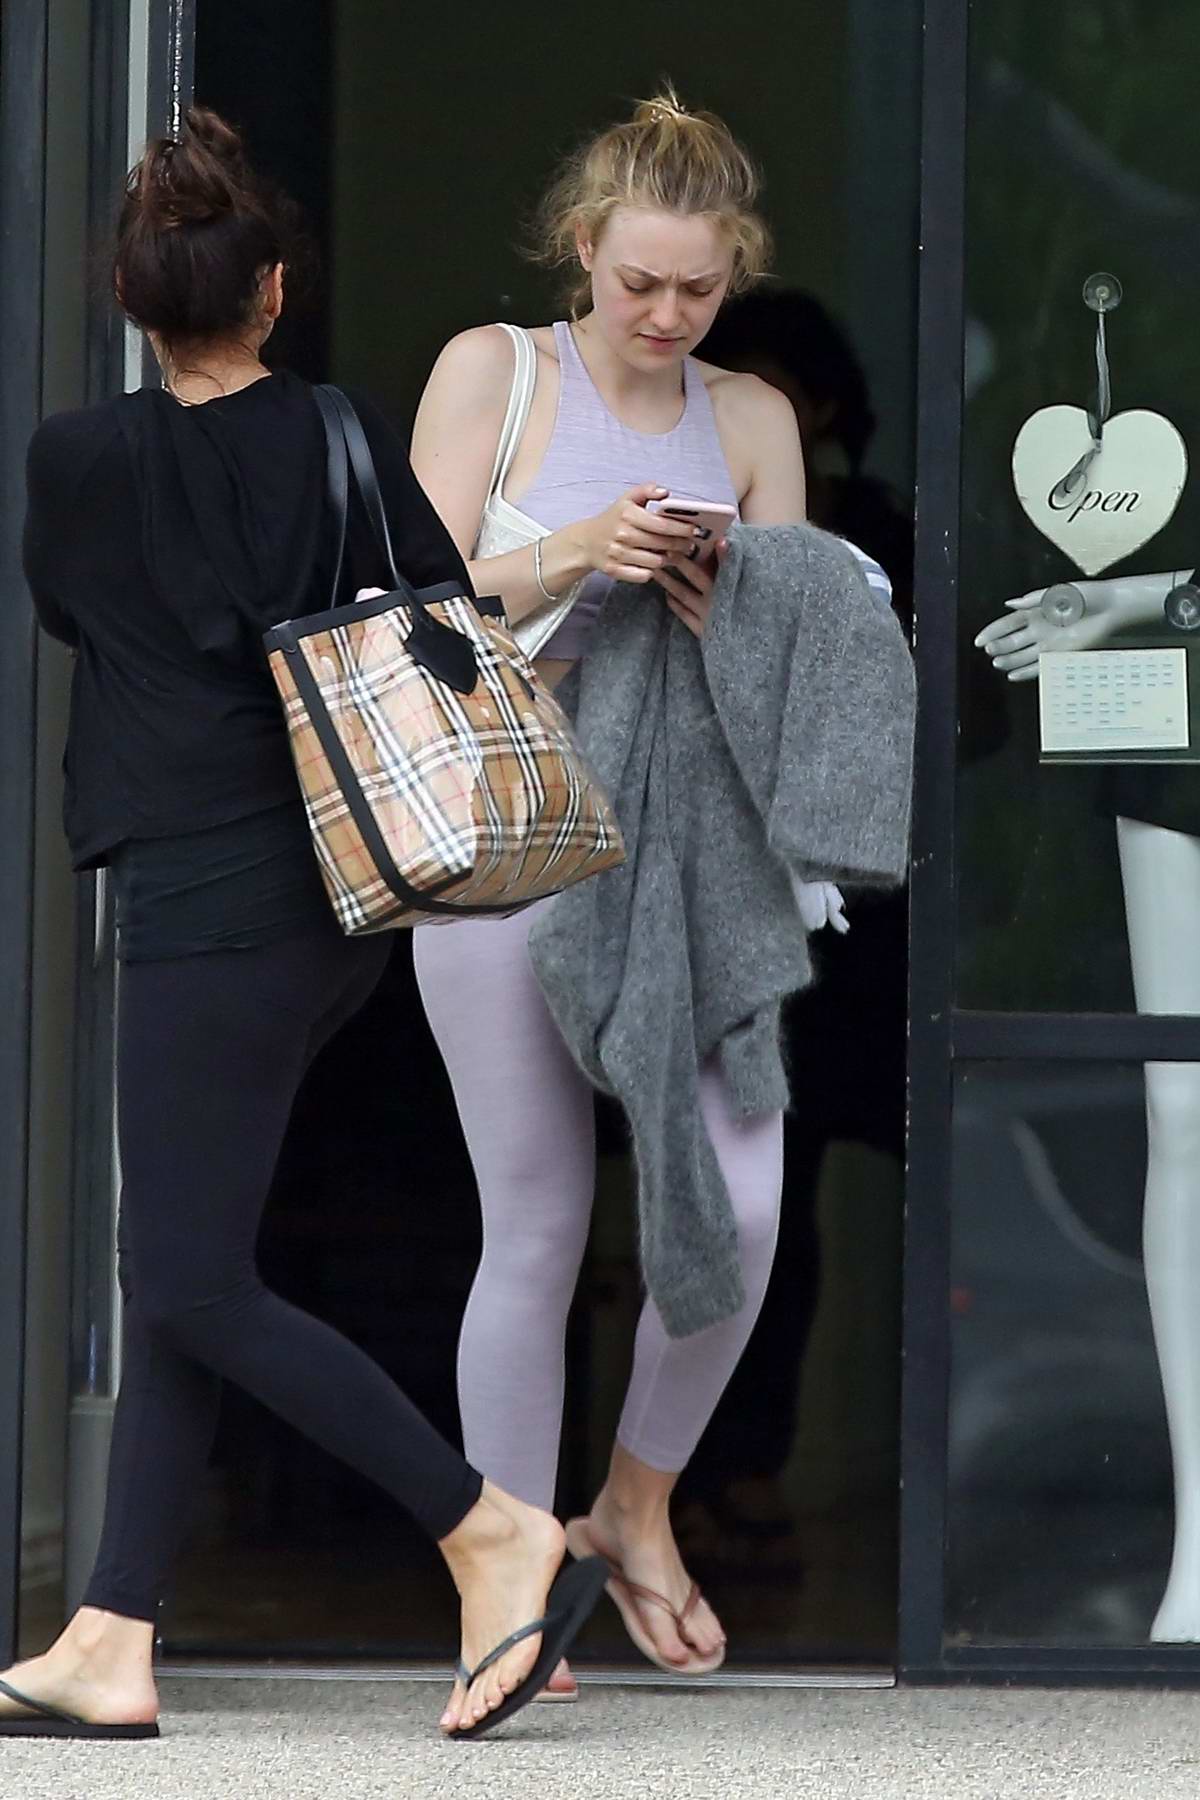 Dakota Fanning seen with her Louis Vuitton suitcase as she leaves